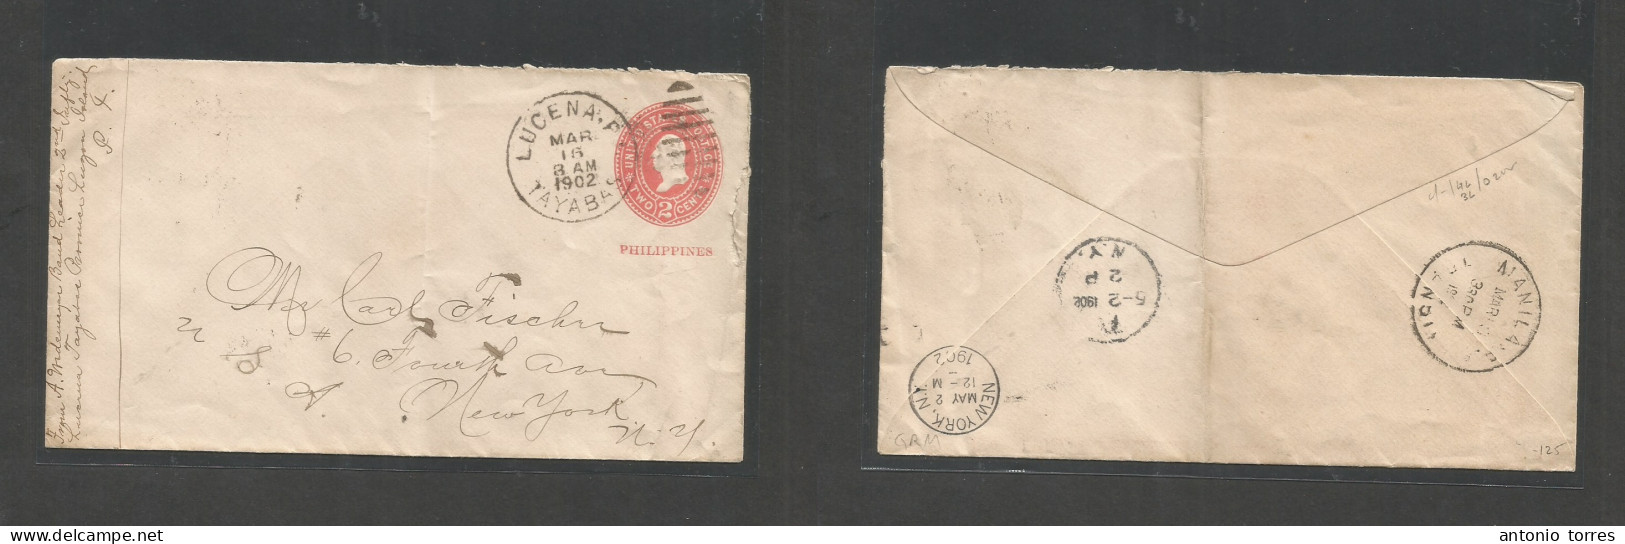 Philippines. 1902 (16 March) US Mail Admin. Lucena, Tayabas - USA, NYC (2 May) US 2c Red Ovptd Stat Env Cds. Scarce Orig - Philippinen